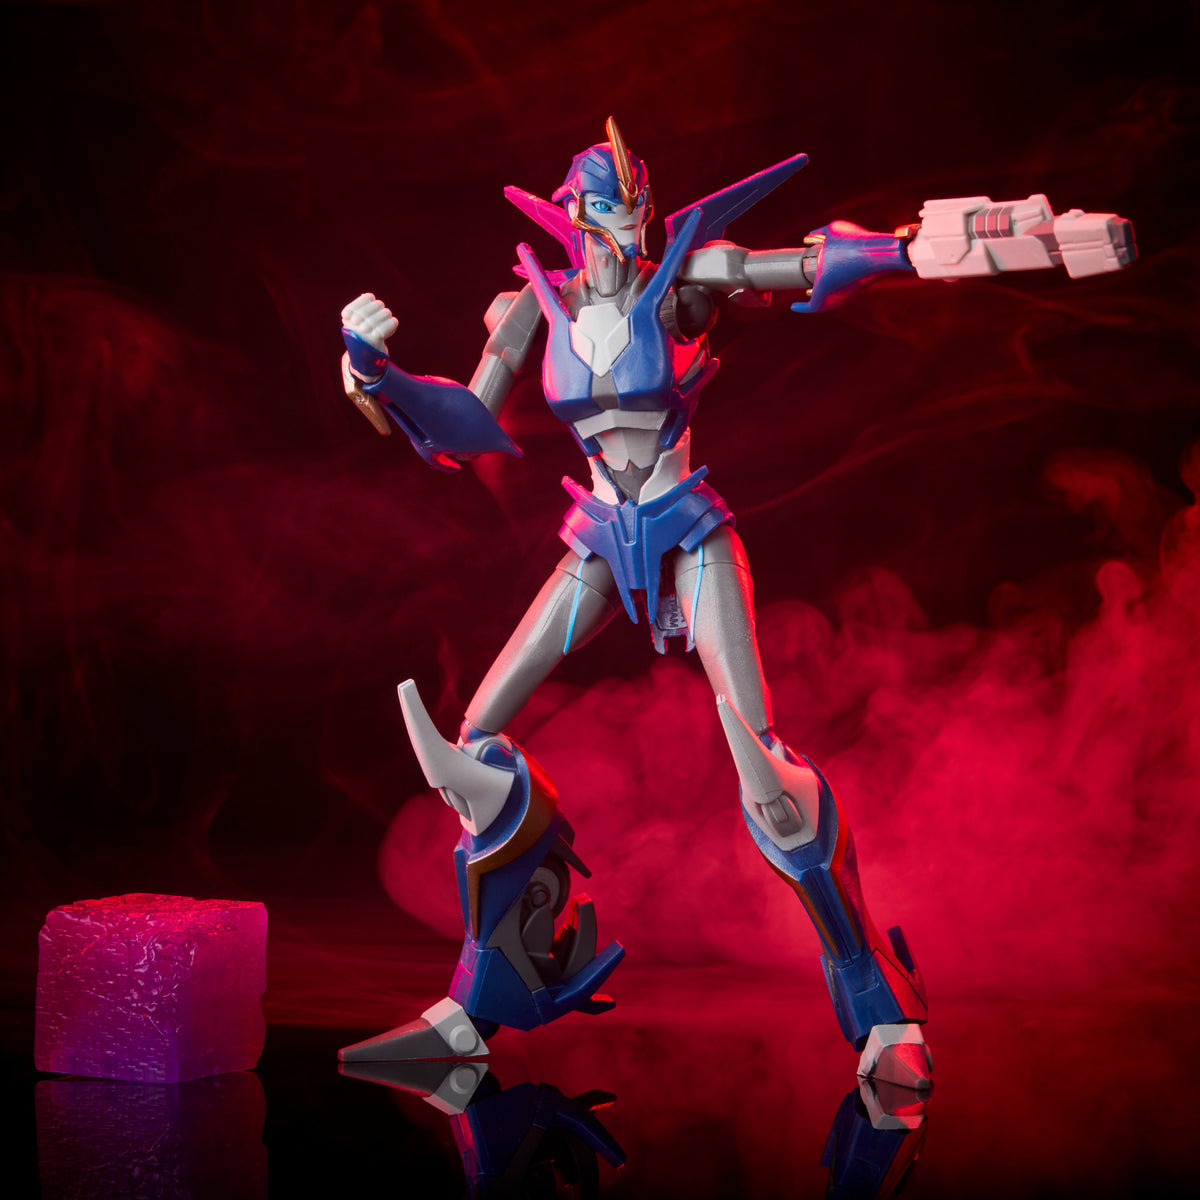 Transformers R.E.D Arcee (Transformers Prime) In-Hand Images - Transformers  News - TFW2005